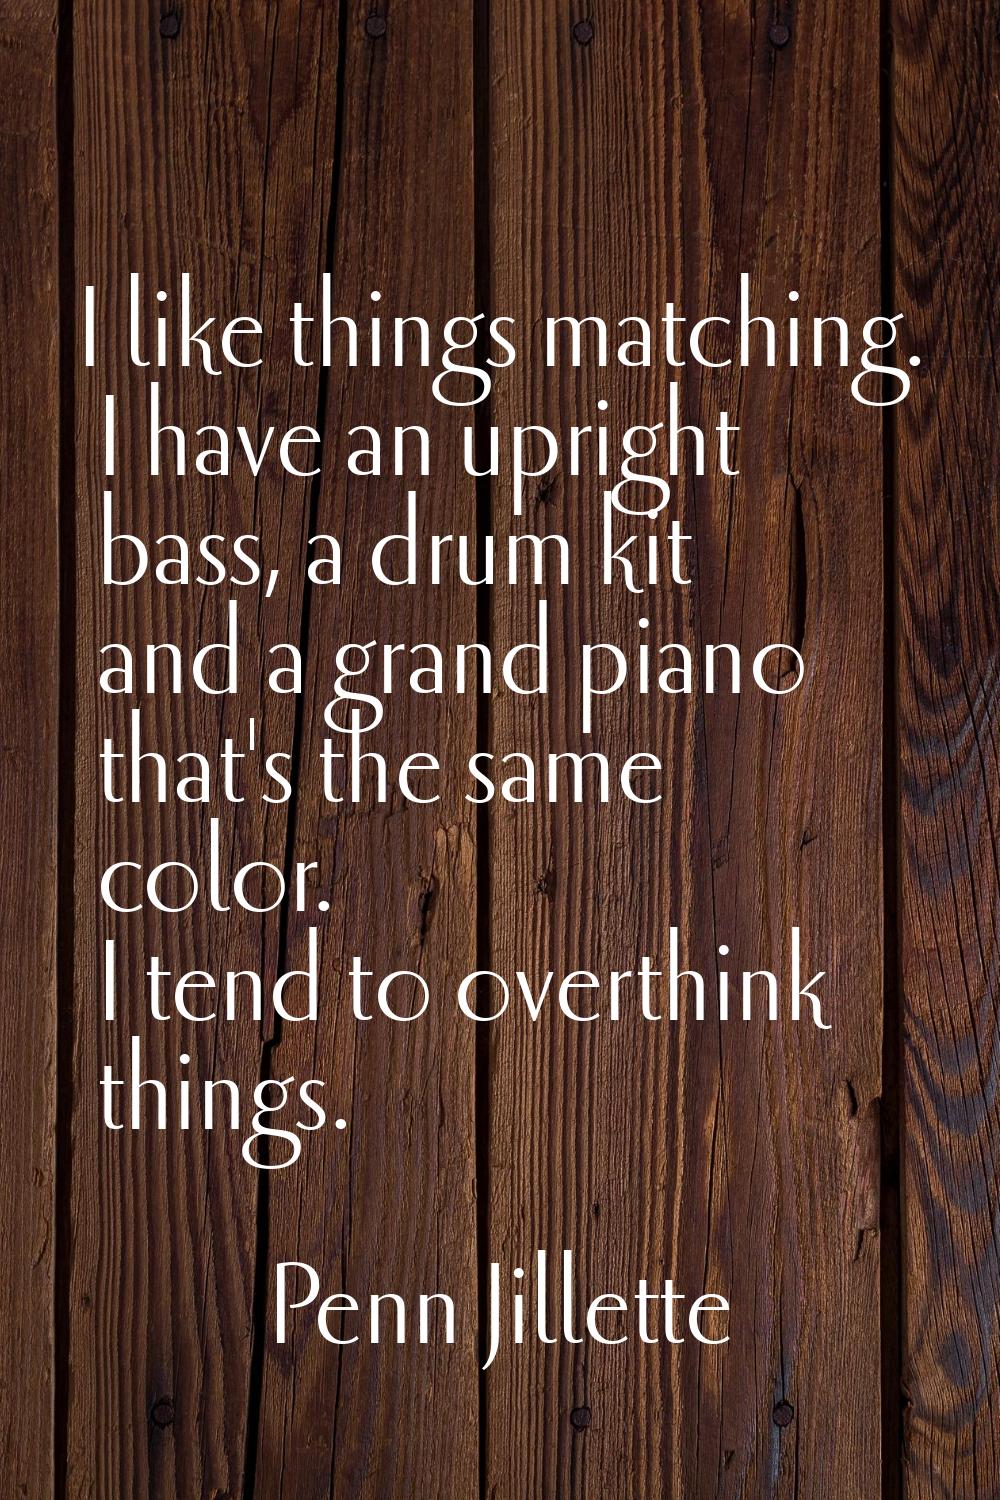 I like things matching. I have an upright bass, a drum kit and a grand piano that's the same color.